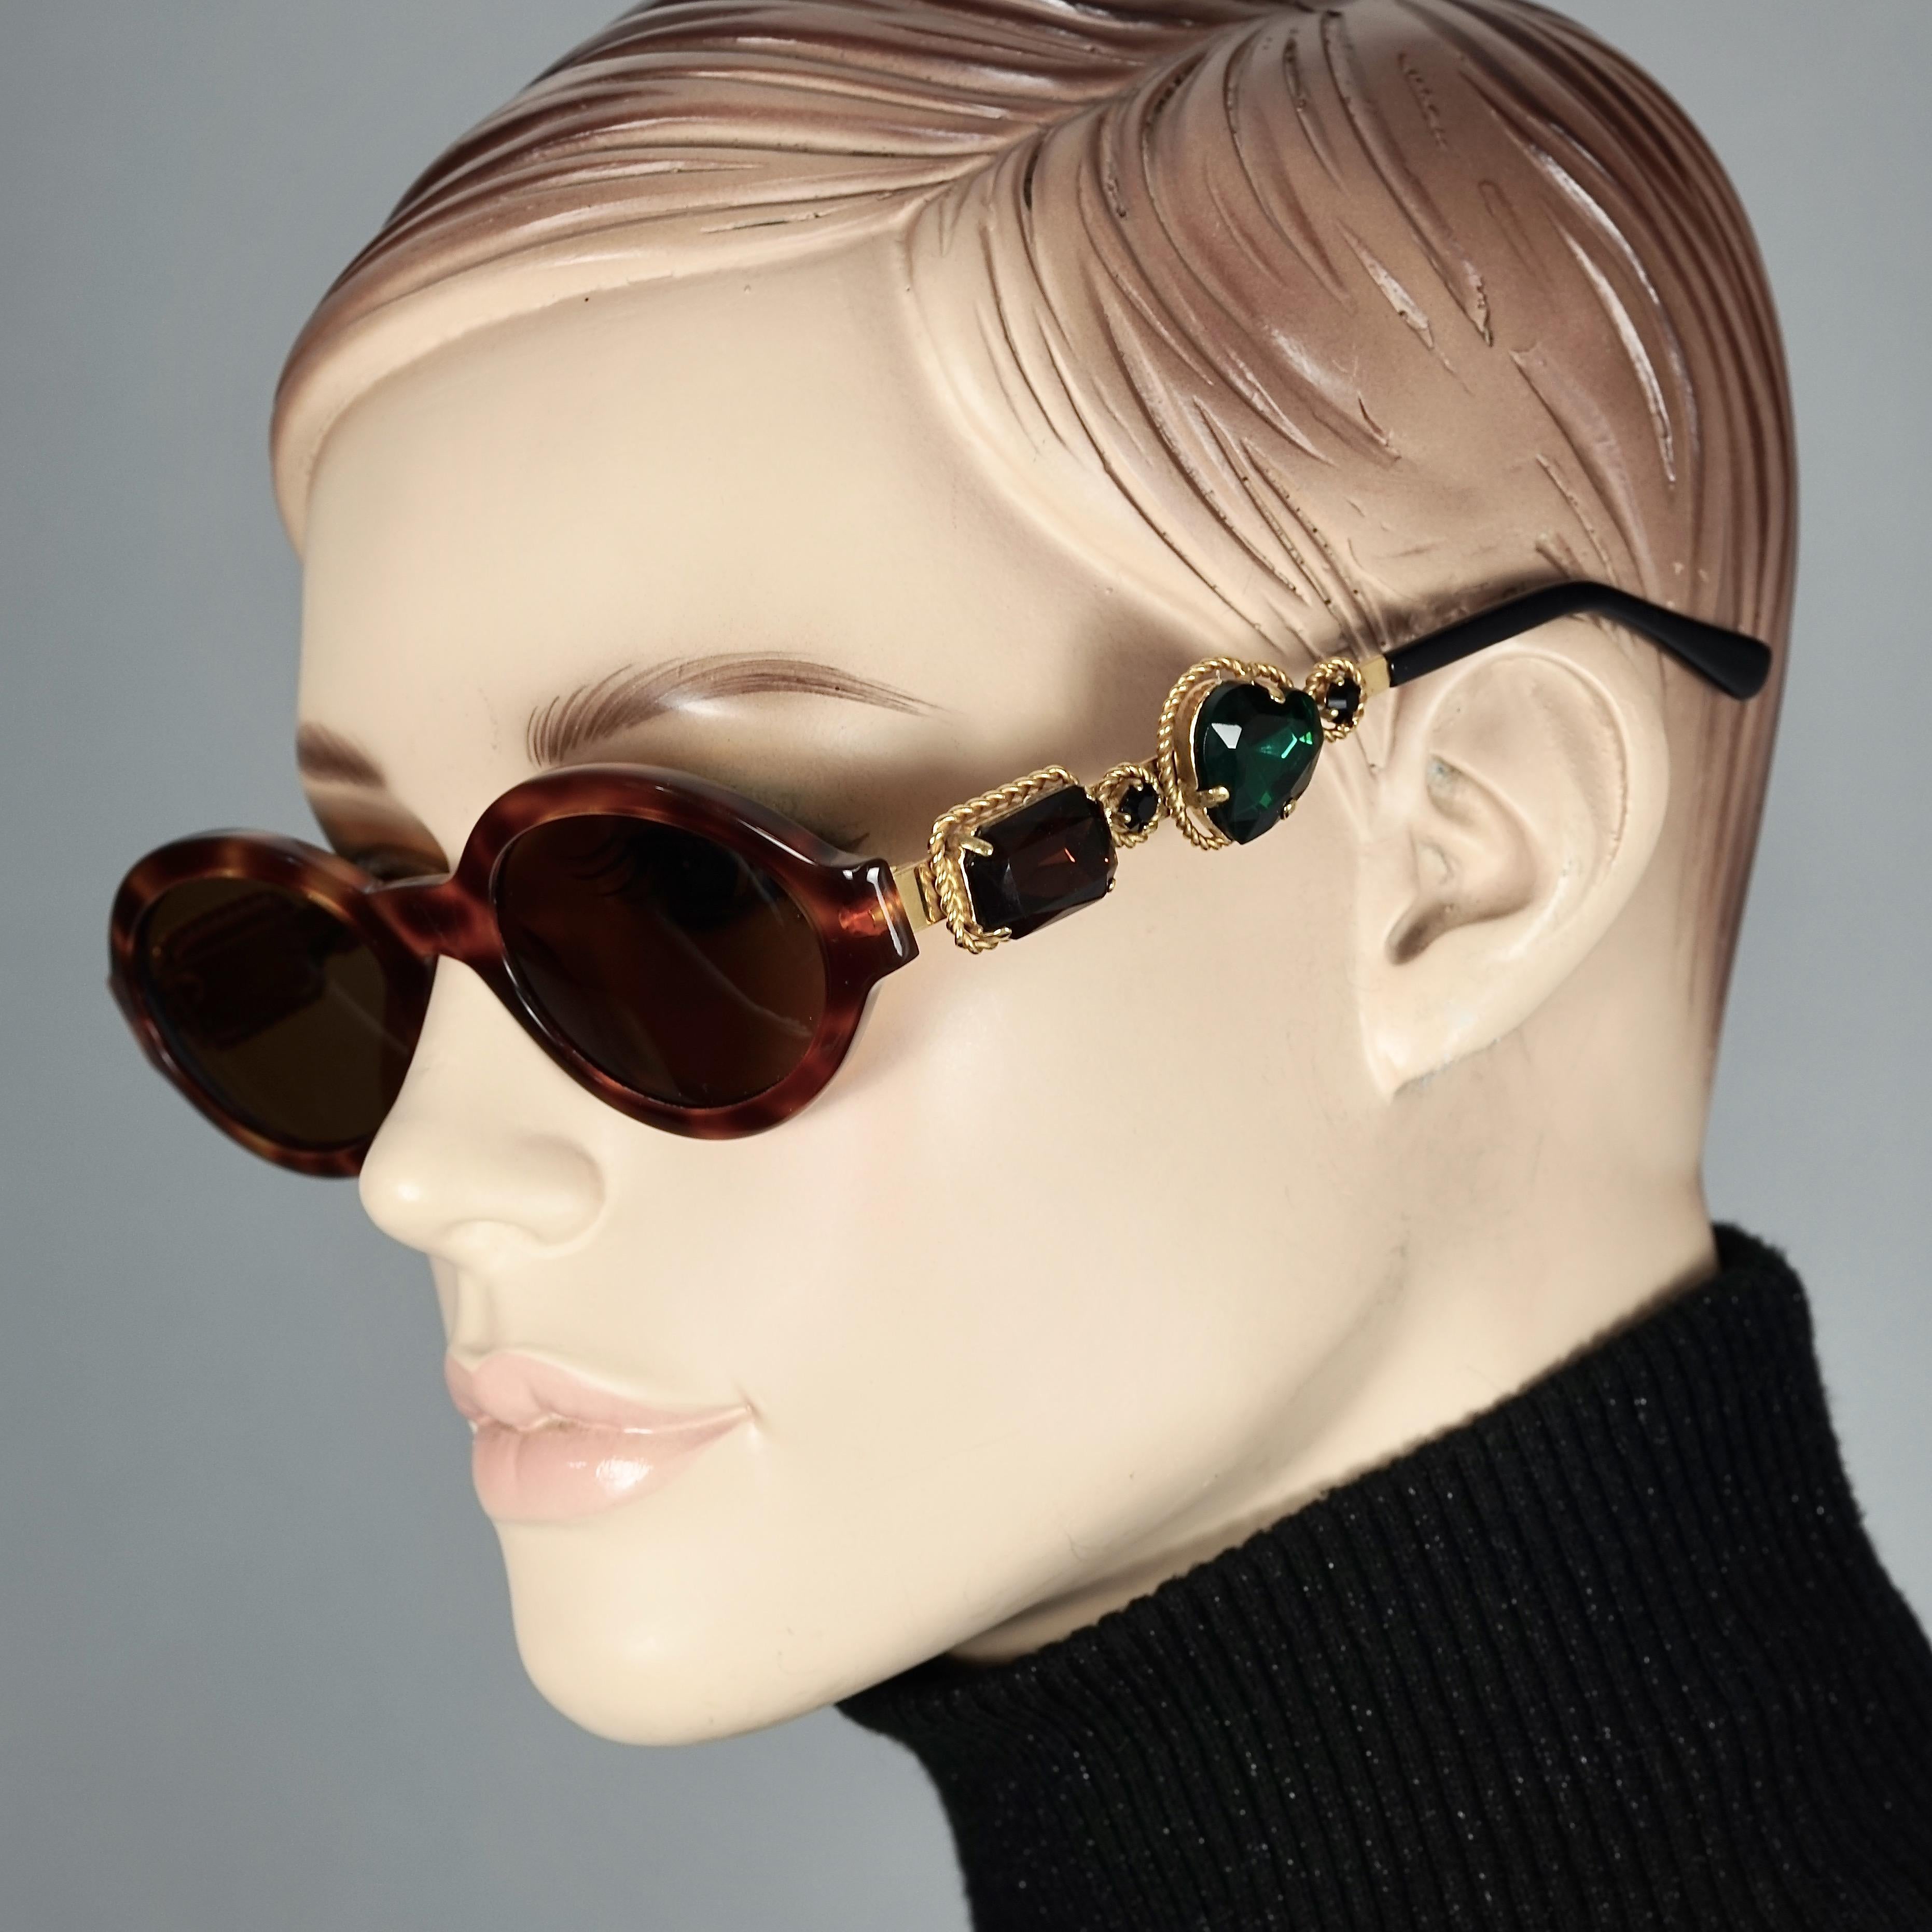 Vintage MOSCHINO Jeweled Tortoiseshell Sunglasses

Measurements:
Height: 1.77 inches (4.5 cm)
Horizontal Width: 5.82 inches  (14.8 cm)
Temples: 5.31 inches  (13.5 cm)

Features:
- 100% Authentic MOSCHINO. 
- Jeweled oval faux tortoiseshell